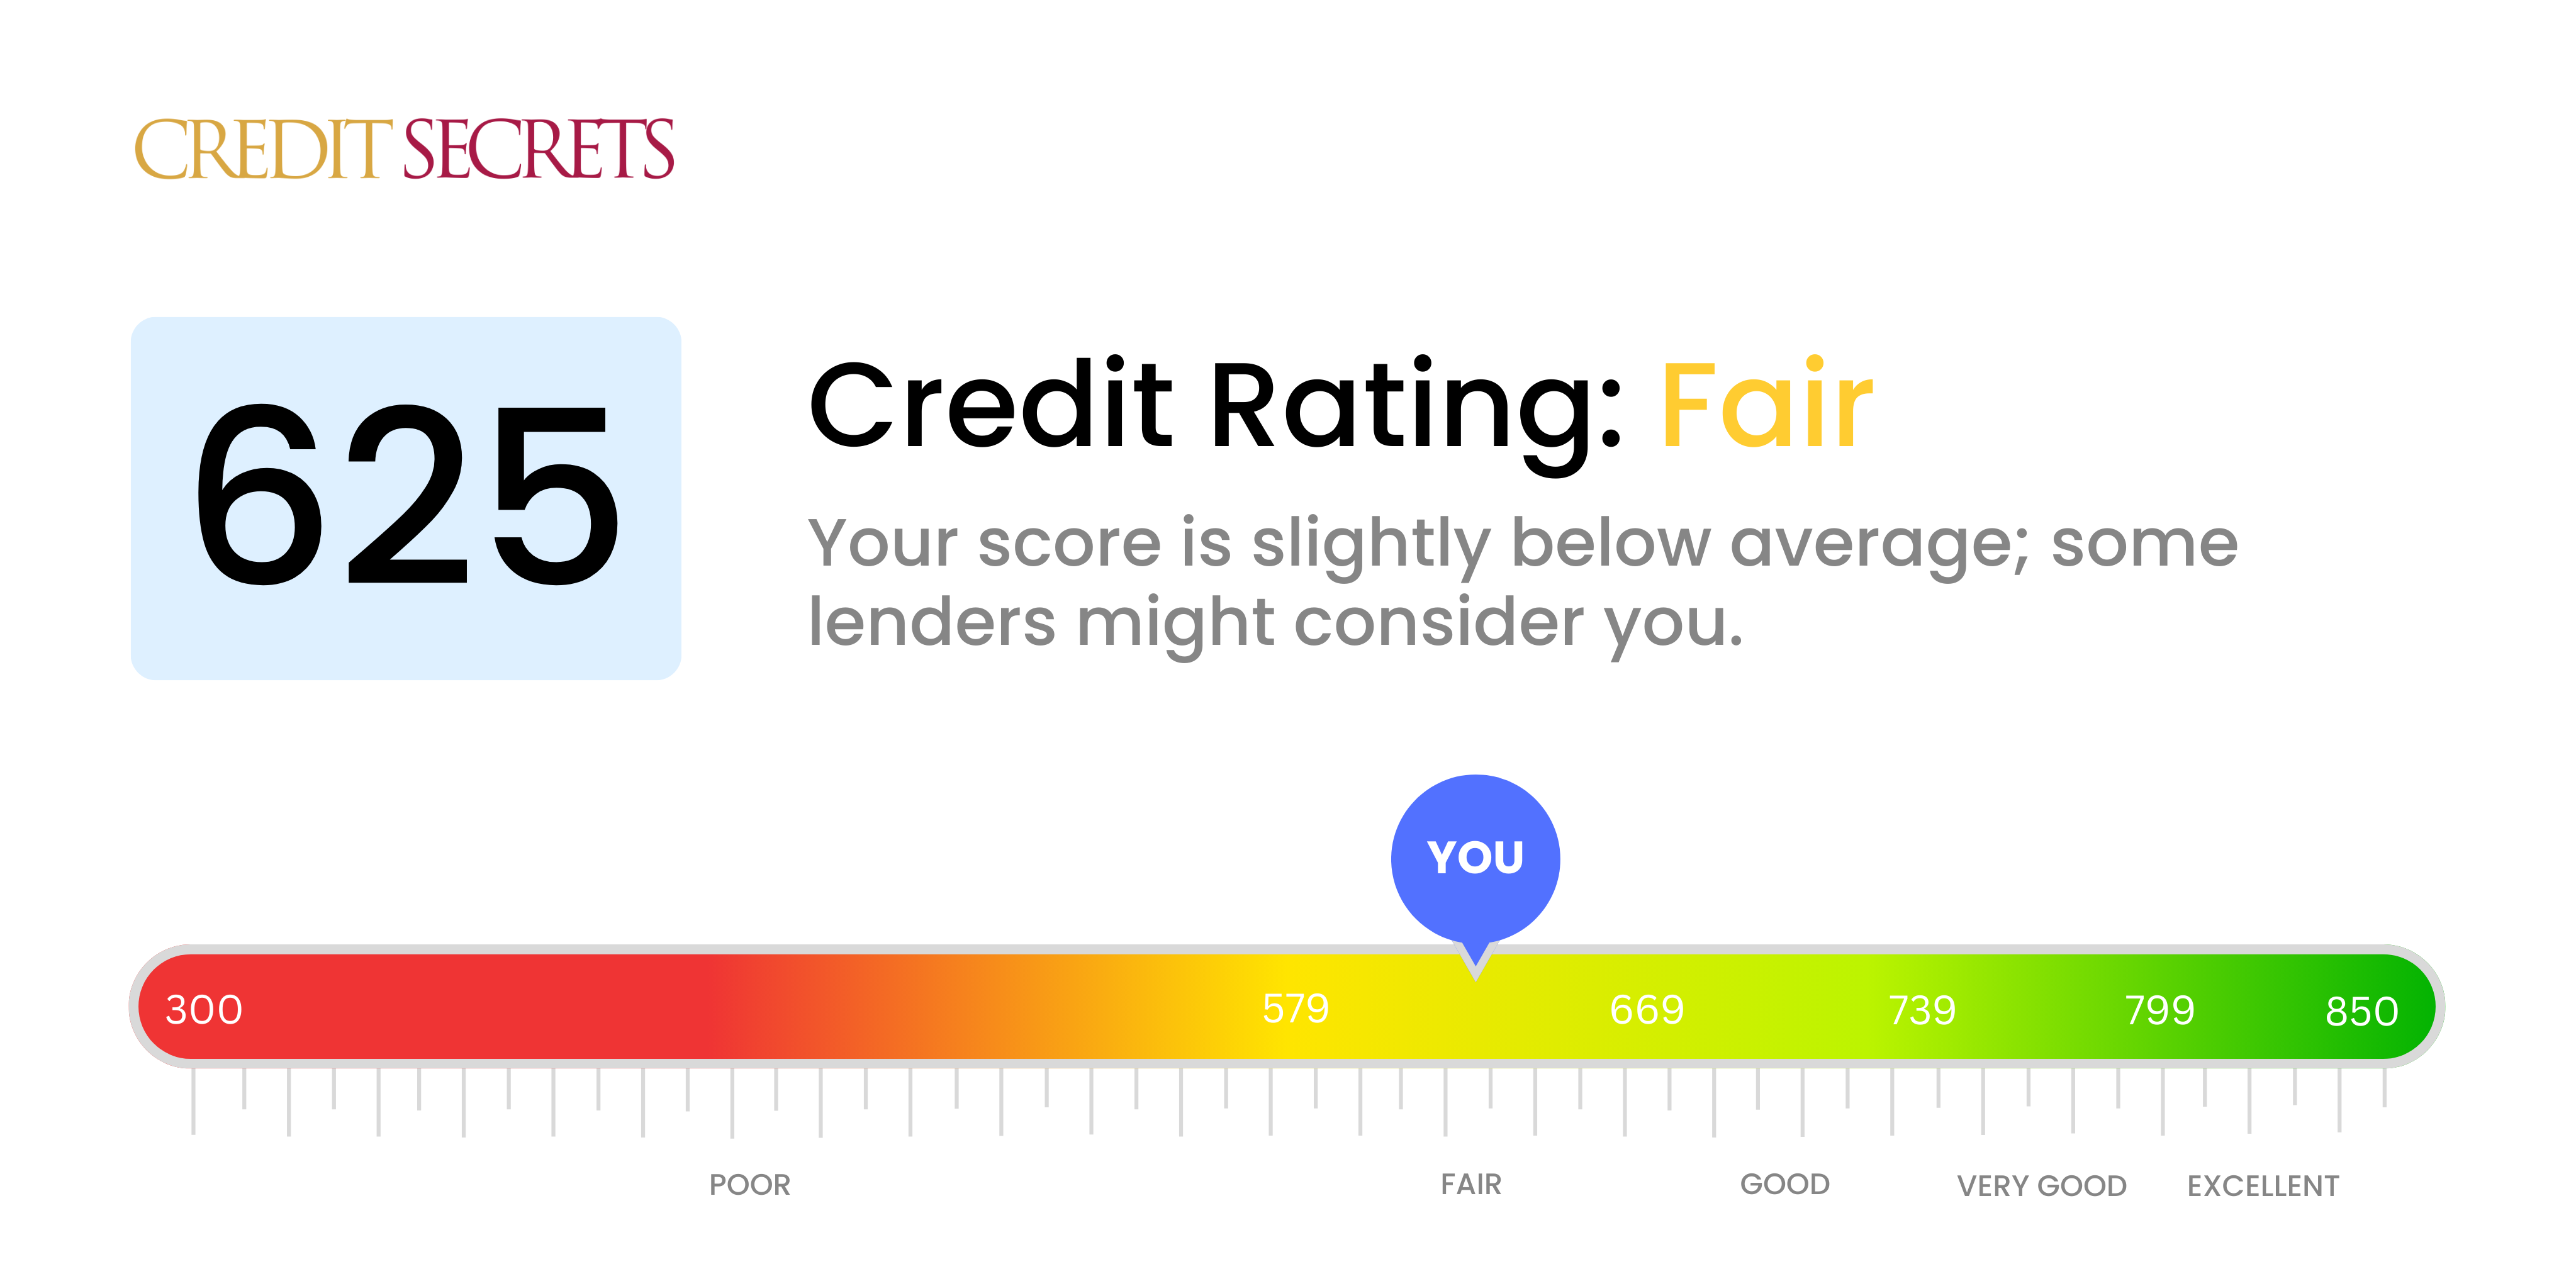 Is 625 a good credit score?